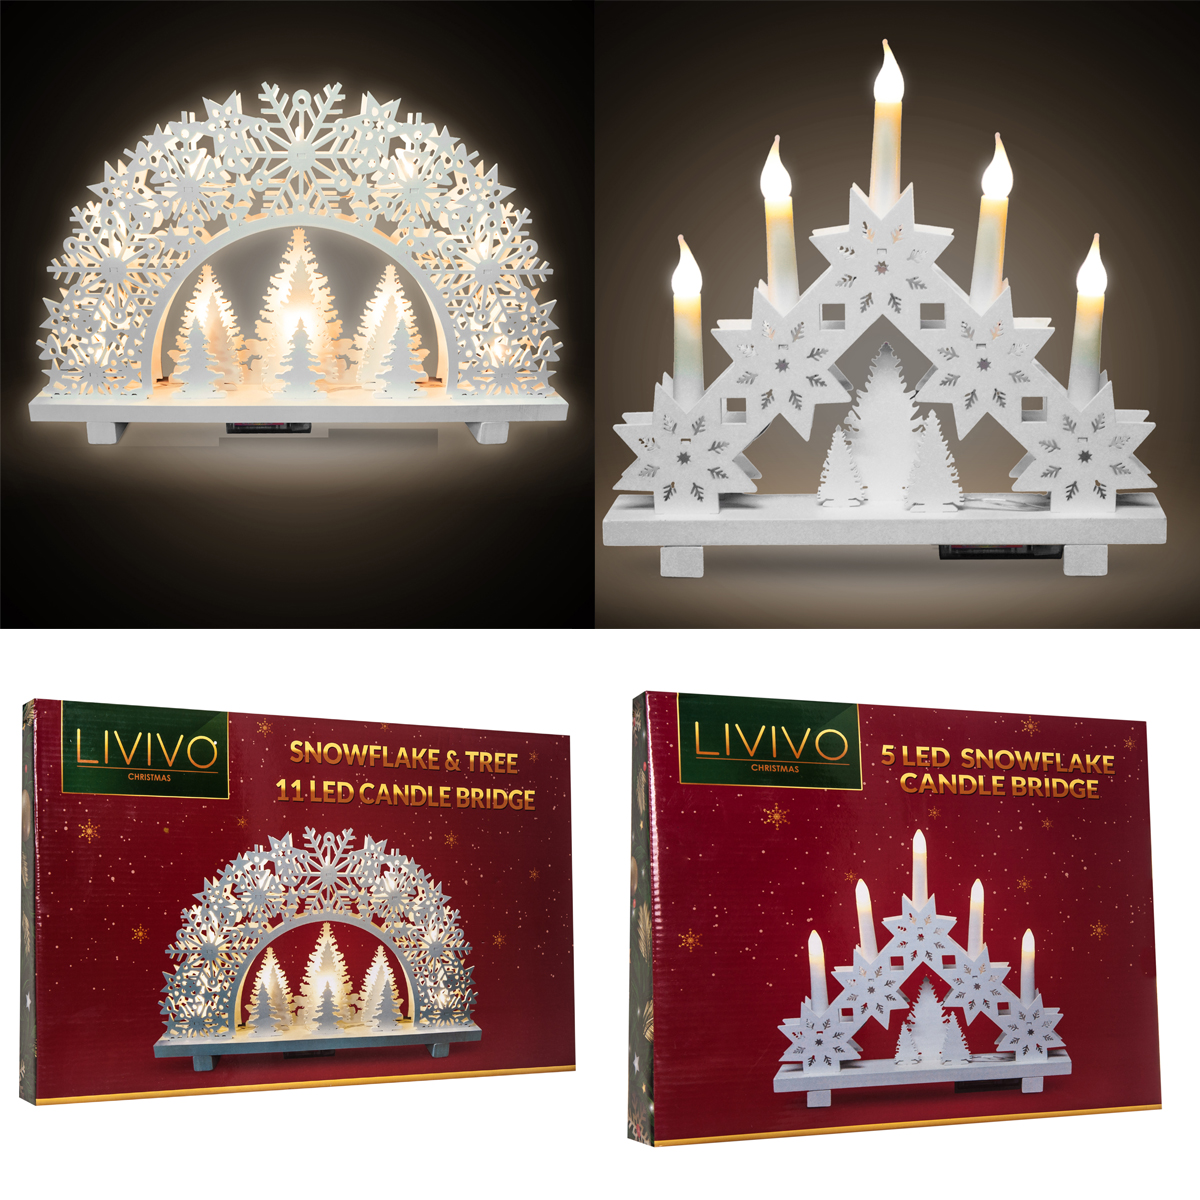 LIVIVO Natural Wooden Christmas Candle Bridge Festive Scene Decoration Battery Operated Warm White LED Xmas Candle Lights SNOWFLAKE 11 LED Brings a Touch Warmth to Any Home This Christmas